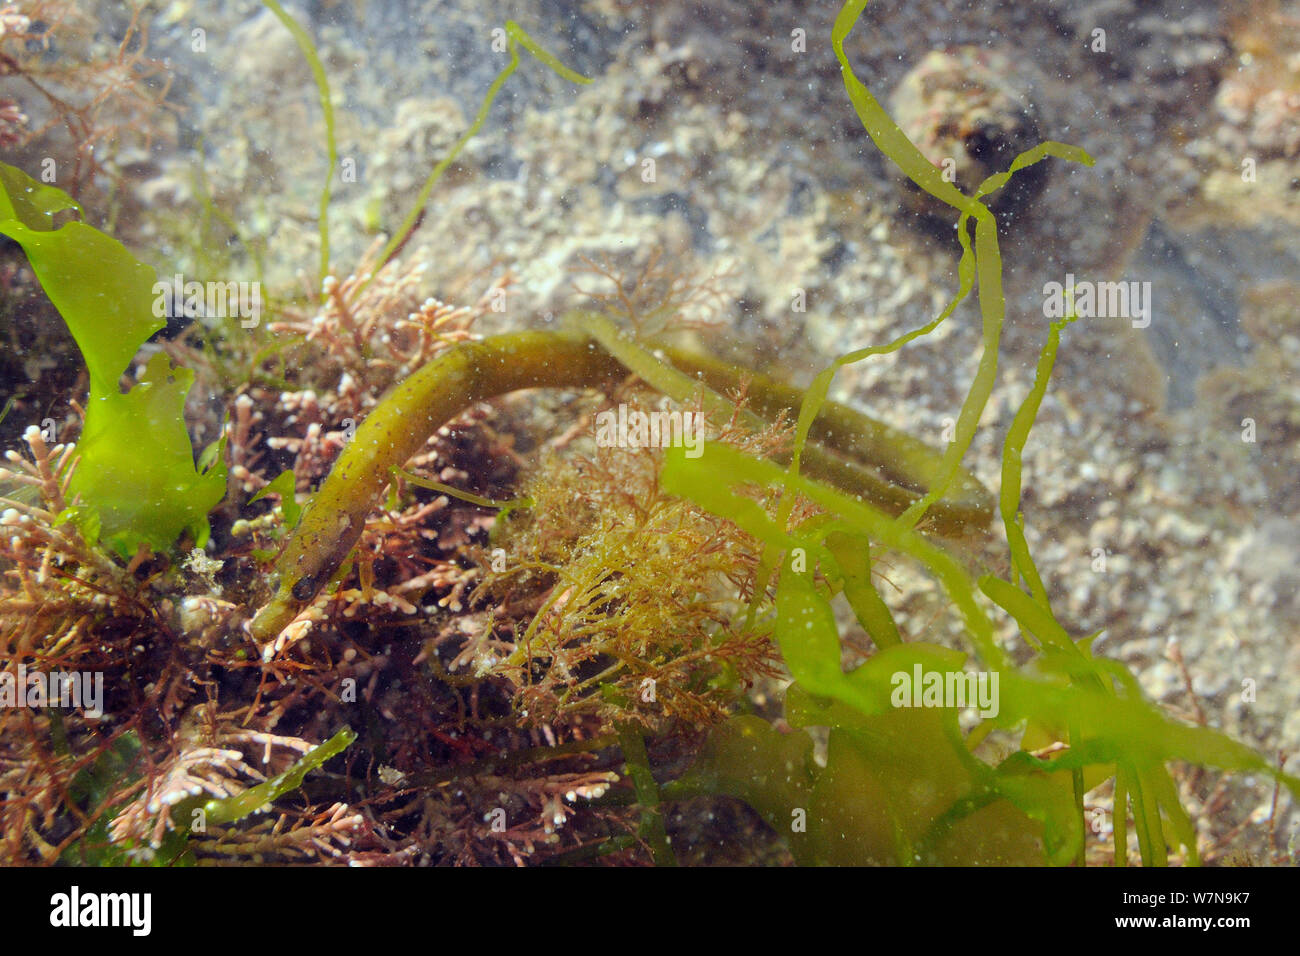 Worm pipefish (Nerophis lumbriciformis) well camouflaged among red and green algae including Coralweed (Corallina officinalis) and Sea lettuce (Ulva lactuca), near Falmouth, Cornwall, UK, August. Stock Photo